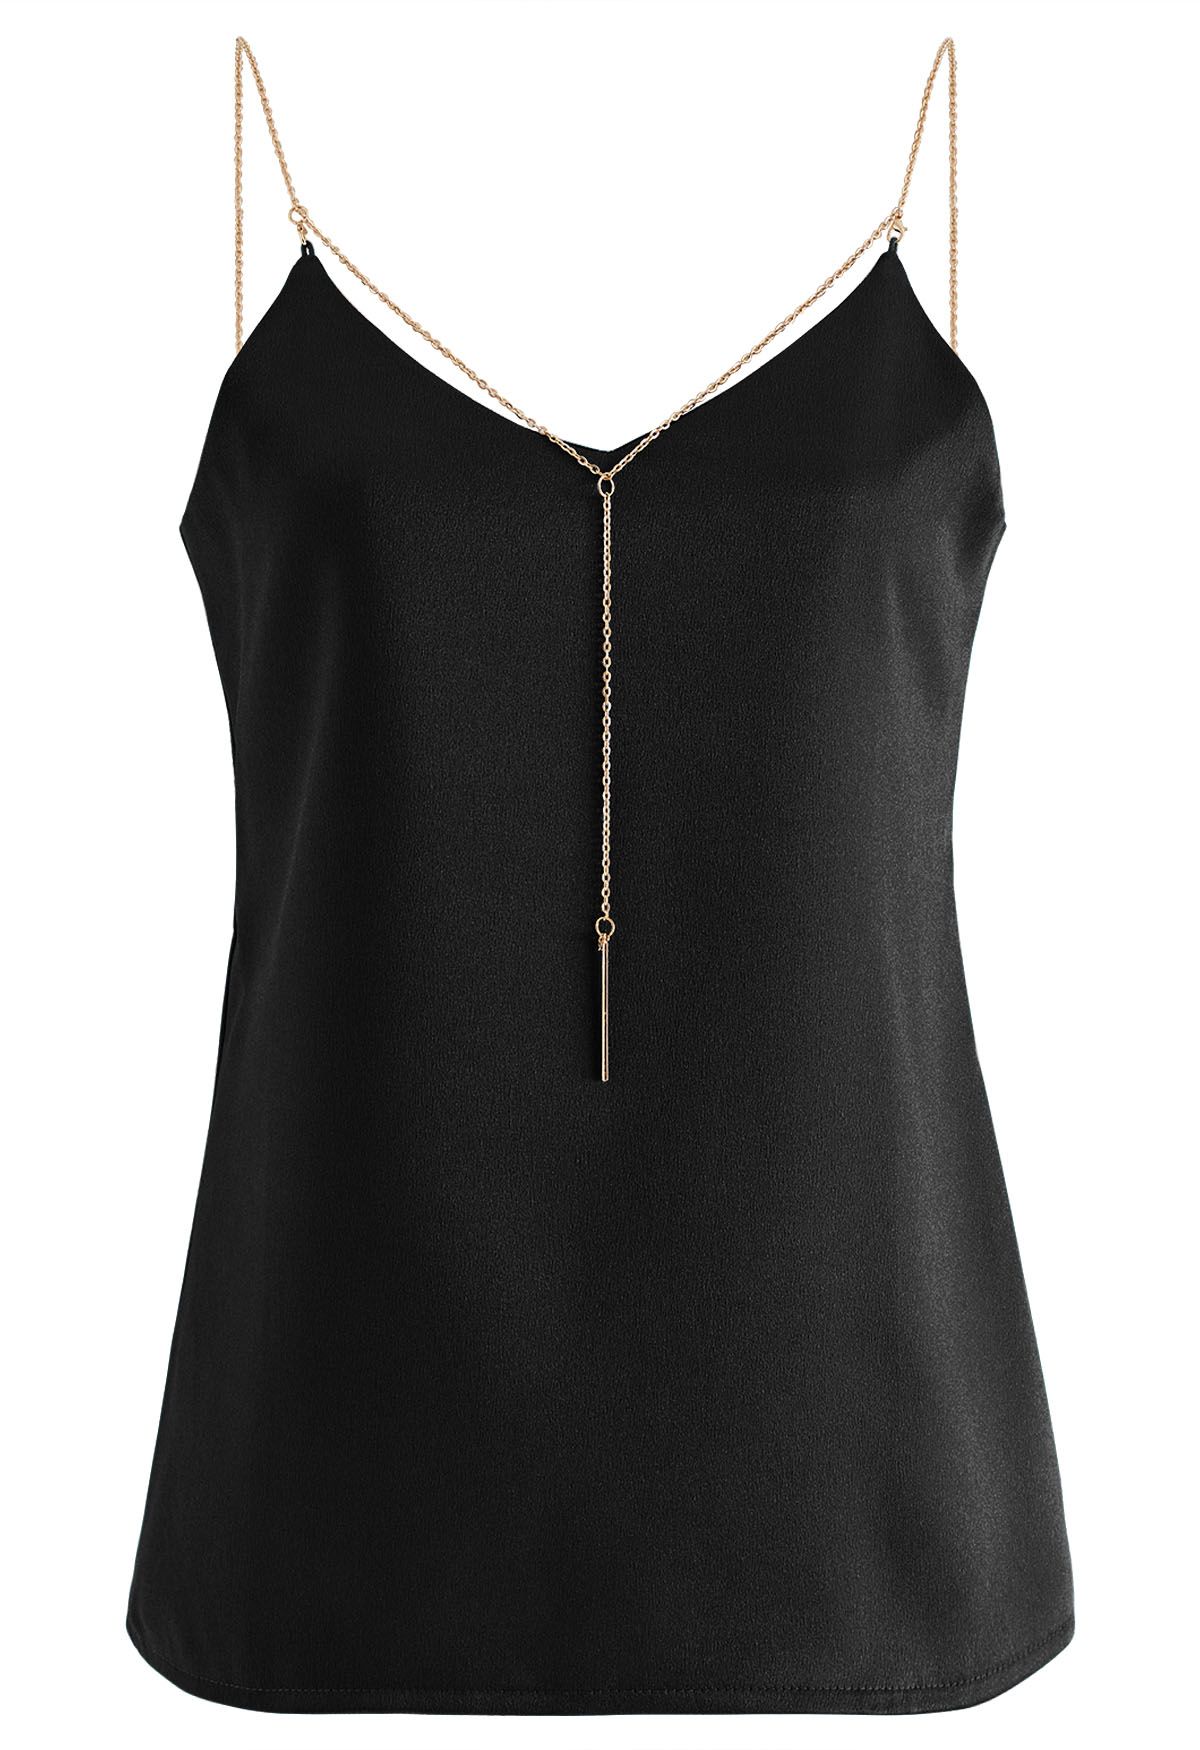 Golden Chain Embellished Satin Cami Top in Black - Retro, Indie